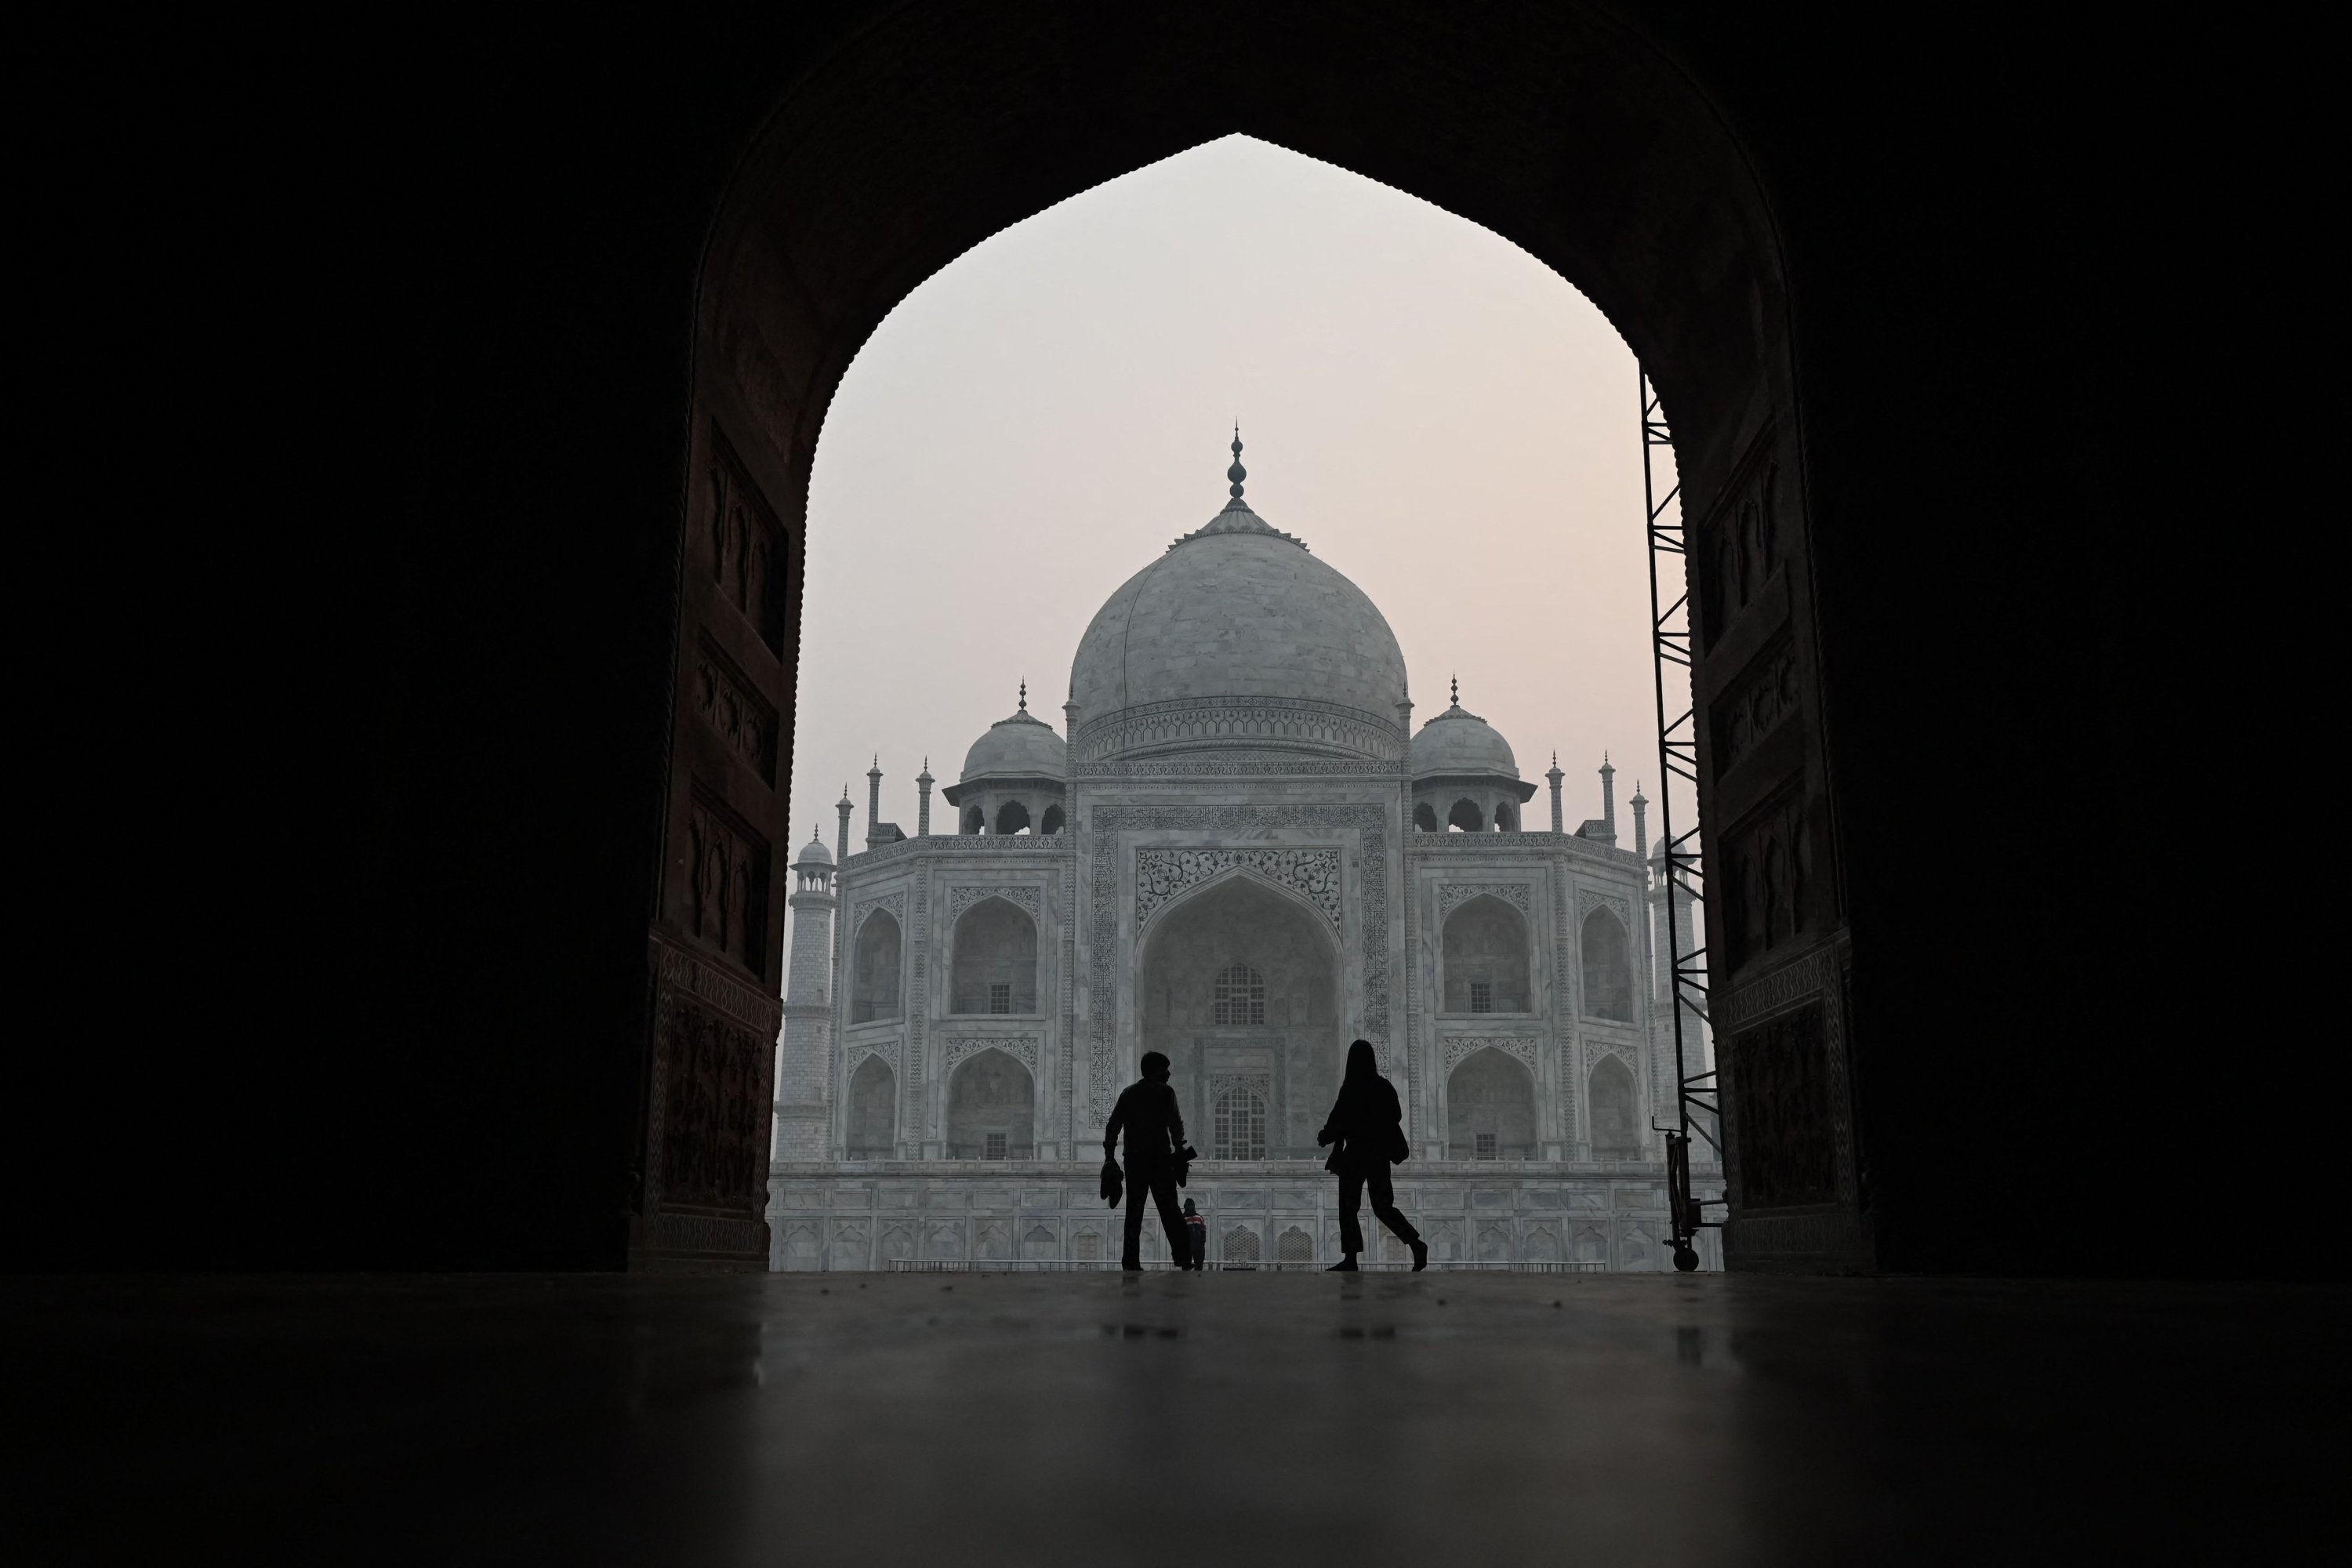 Visitors walk inside the Taj Mahal amid smoggy conditions as the sun rises in Agra, India, Nov. 16, 2021. (AFP Photo)